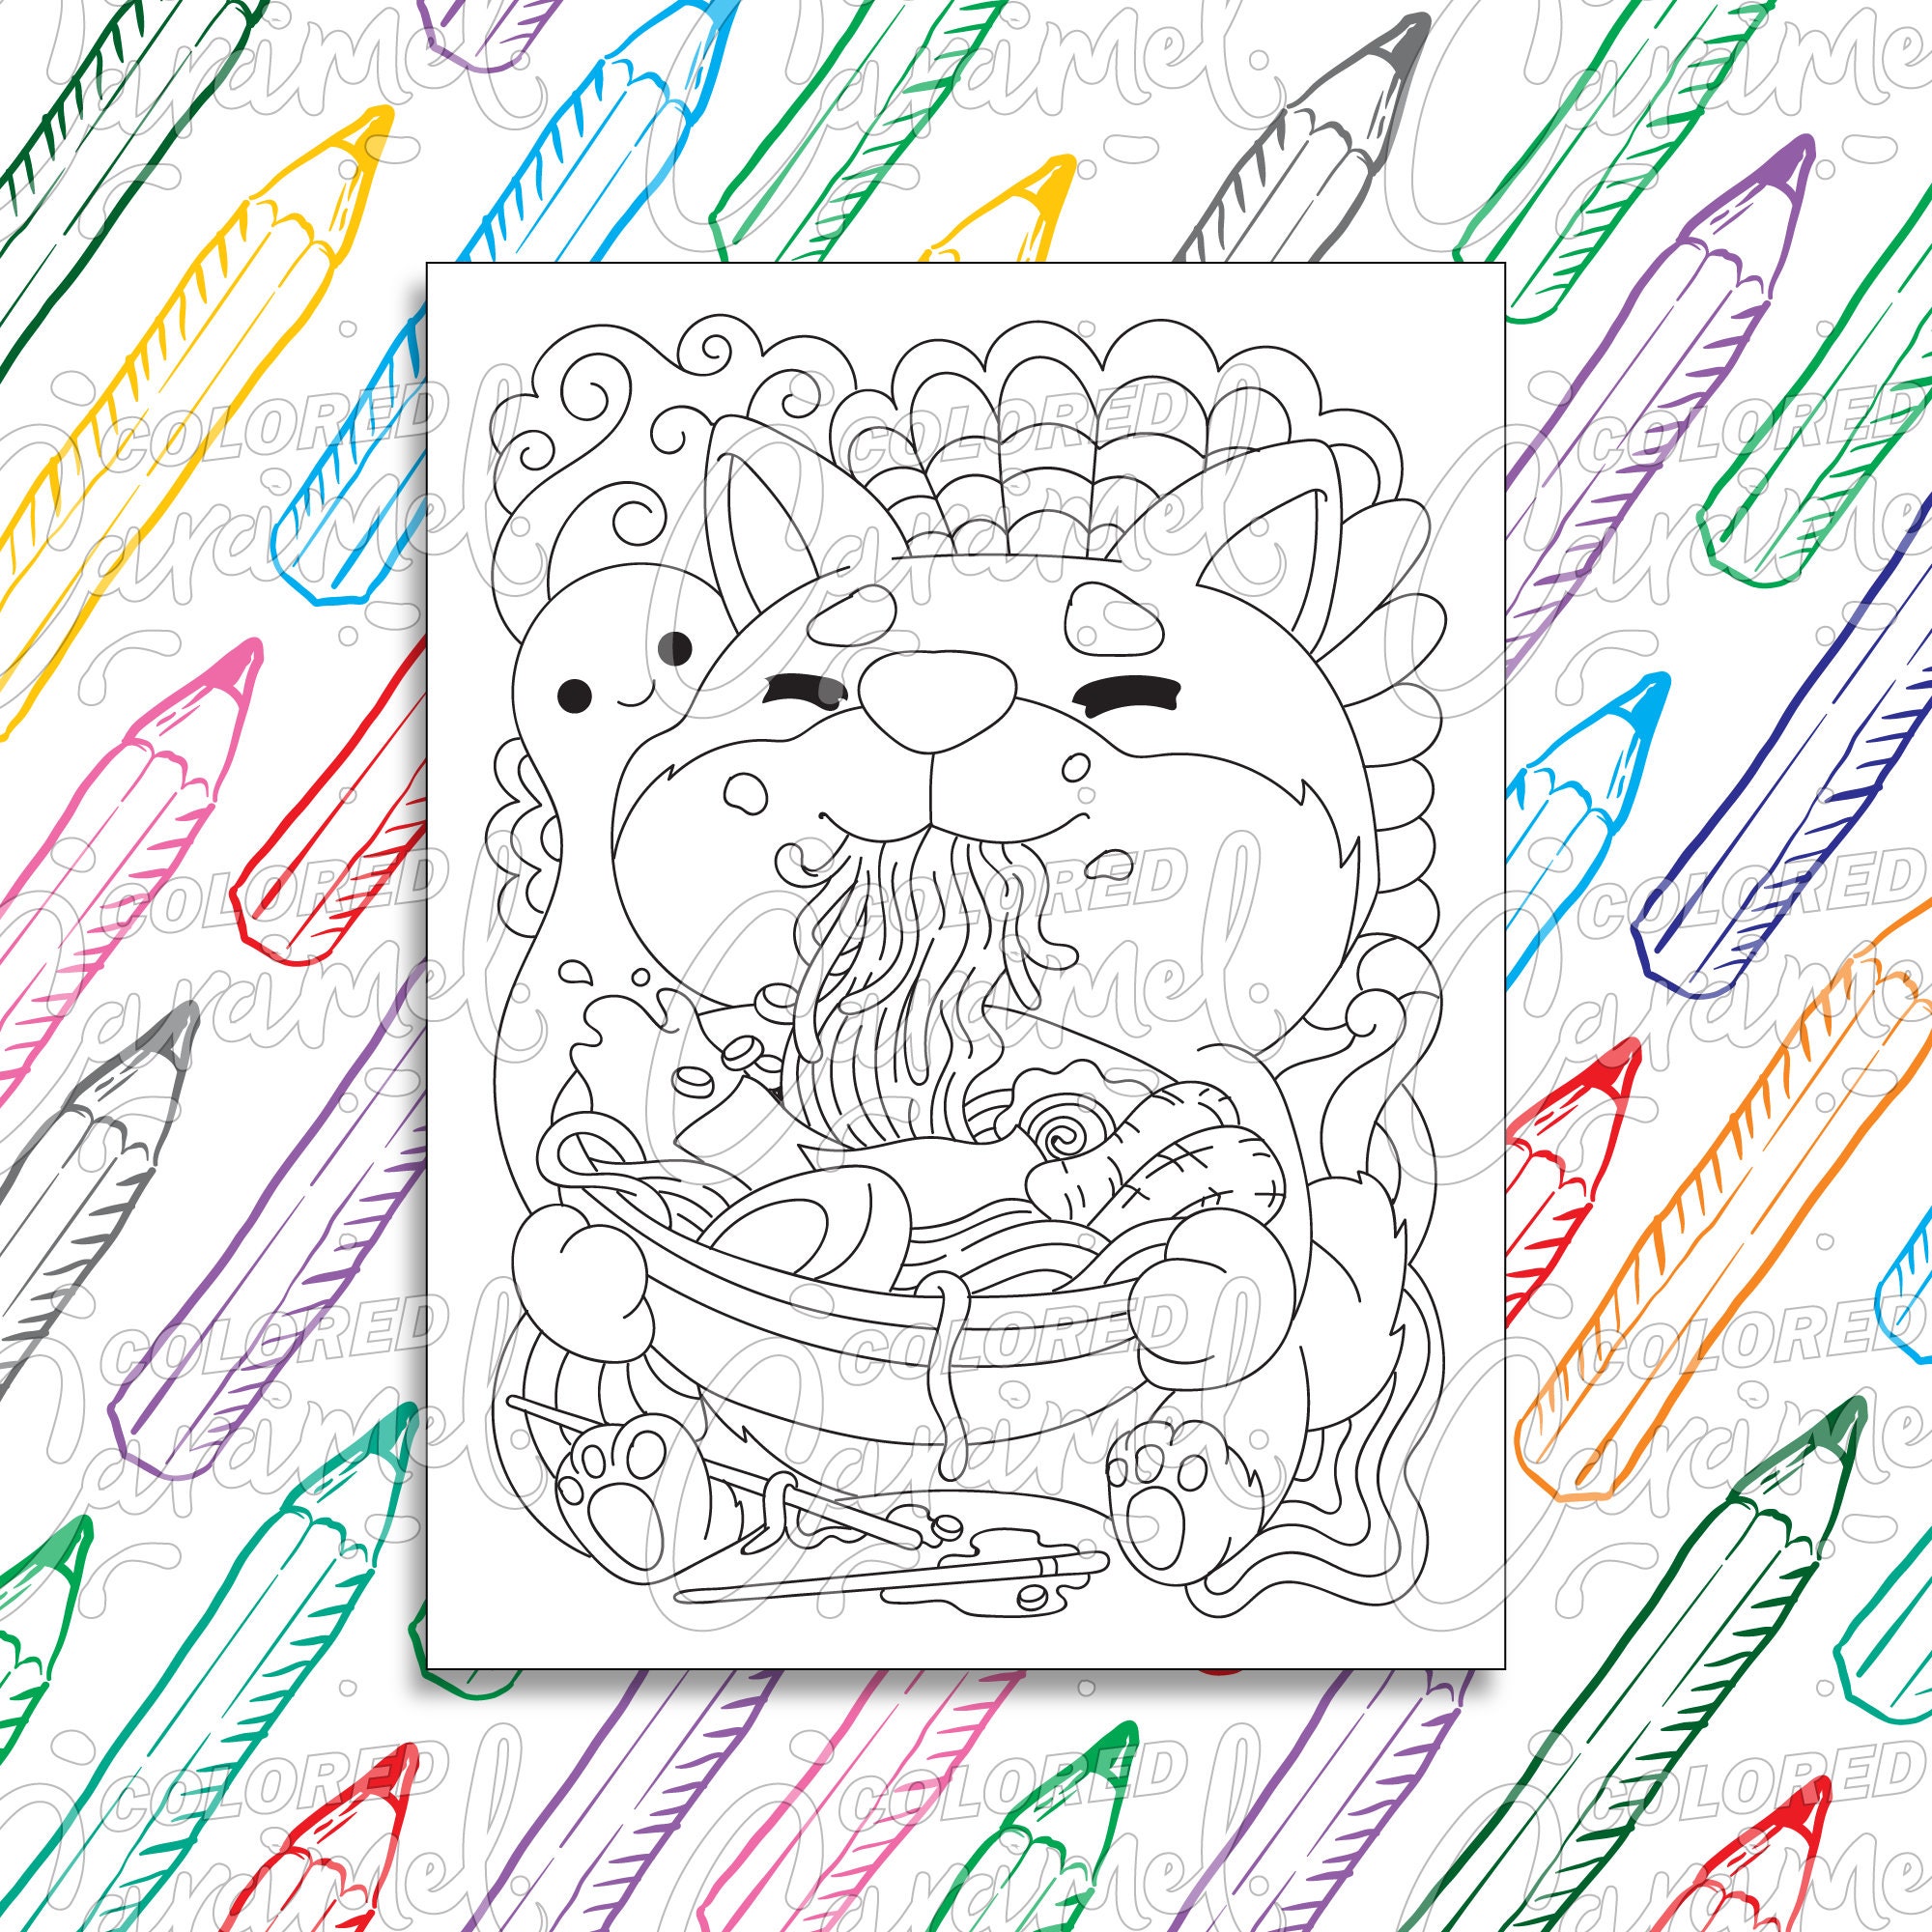 Kawaii Coloring Page Digital Download PDF with Funny Dog Eating Ramen Noodles Japanese Inspired Drawing & Illustration